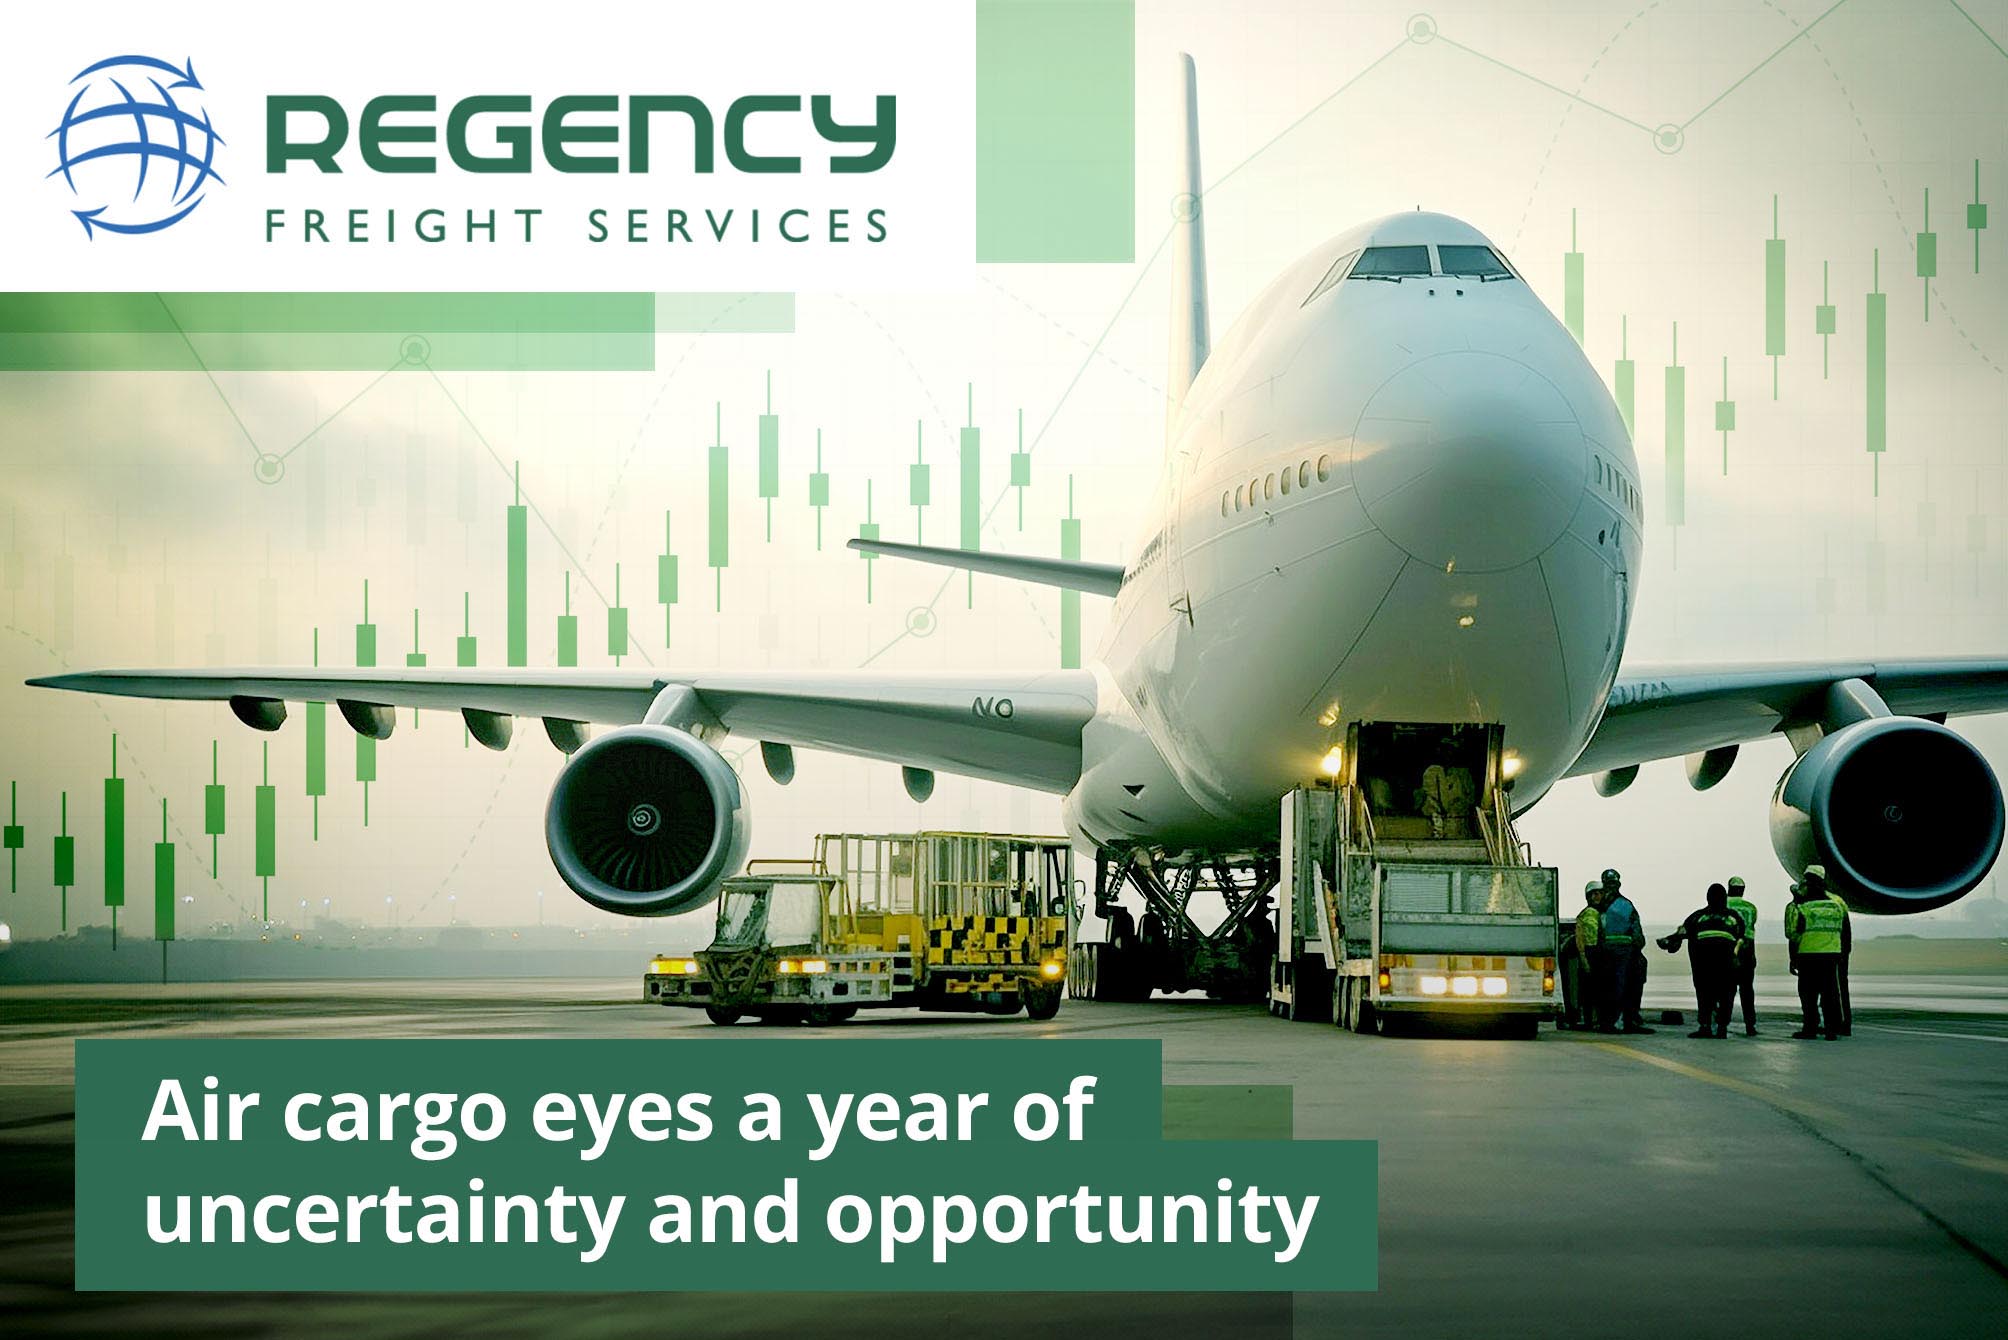 Air cargo eyes a year of uncertainty and opportunity